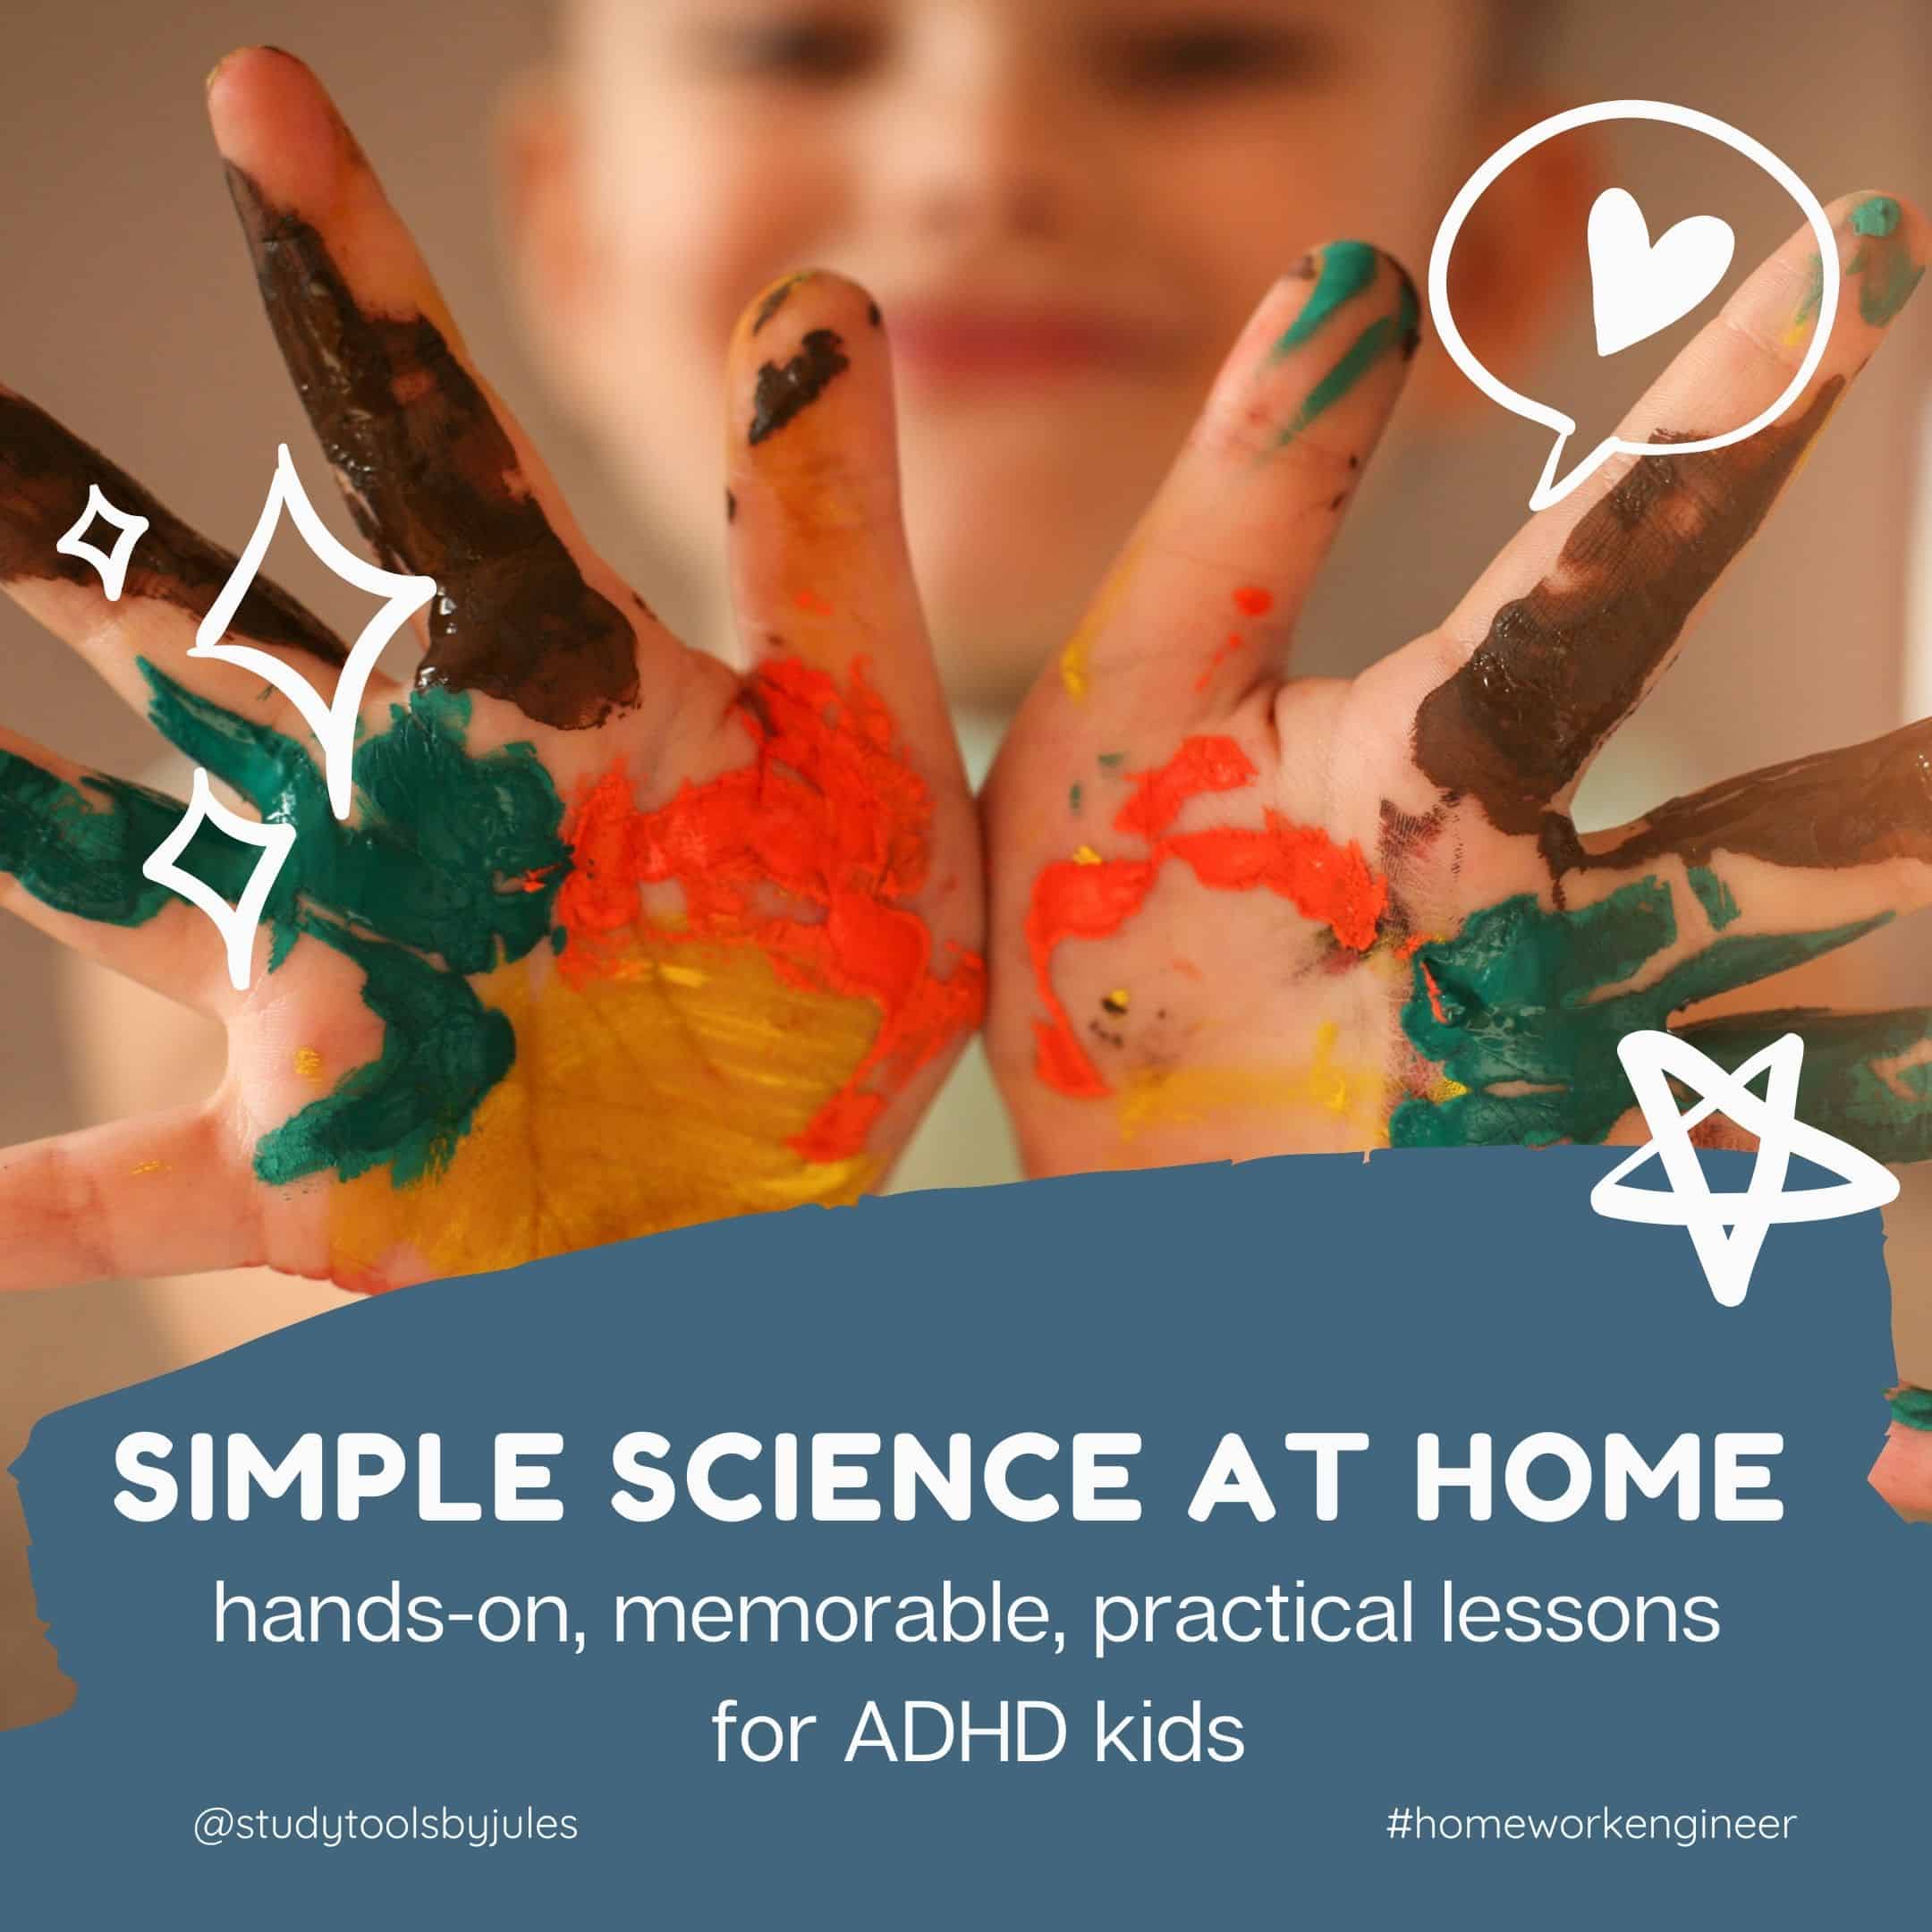 Simple science at home. Hands-on, memorable, practical lessons for ADHD kids. Image of a kid with paint on the palms of their hands.